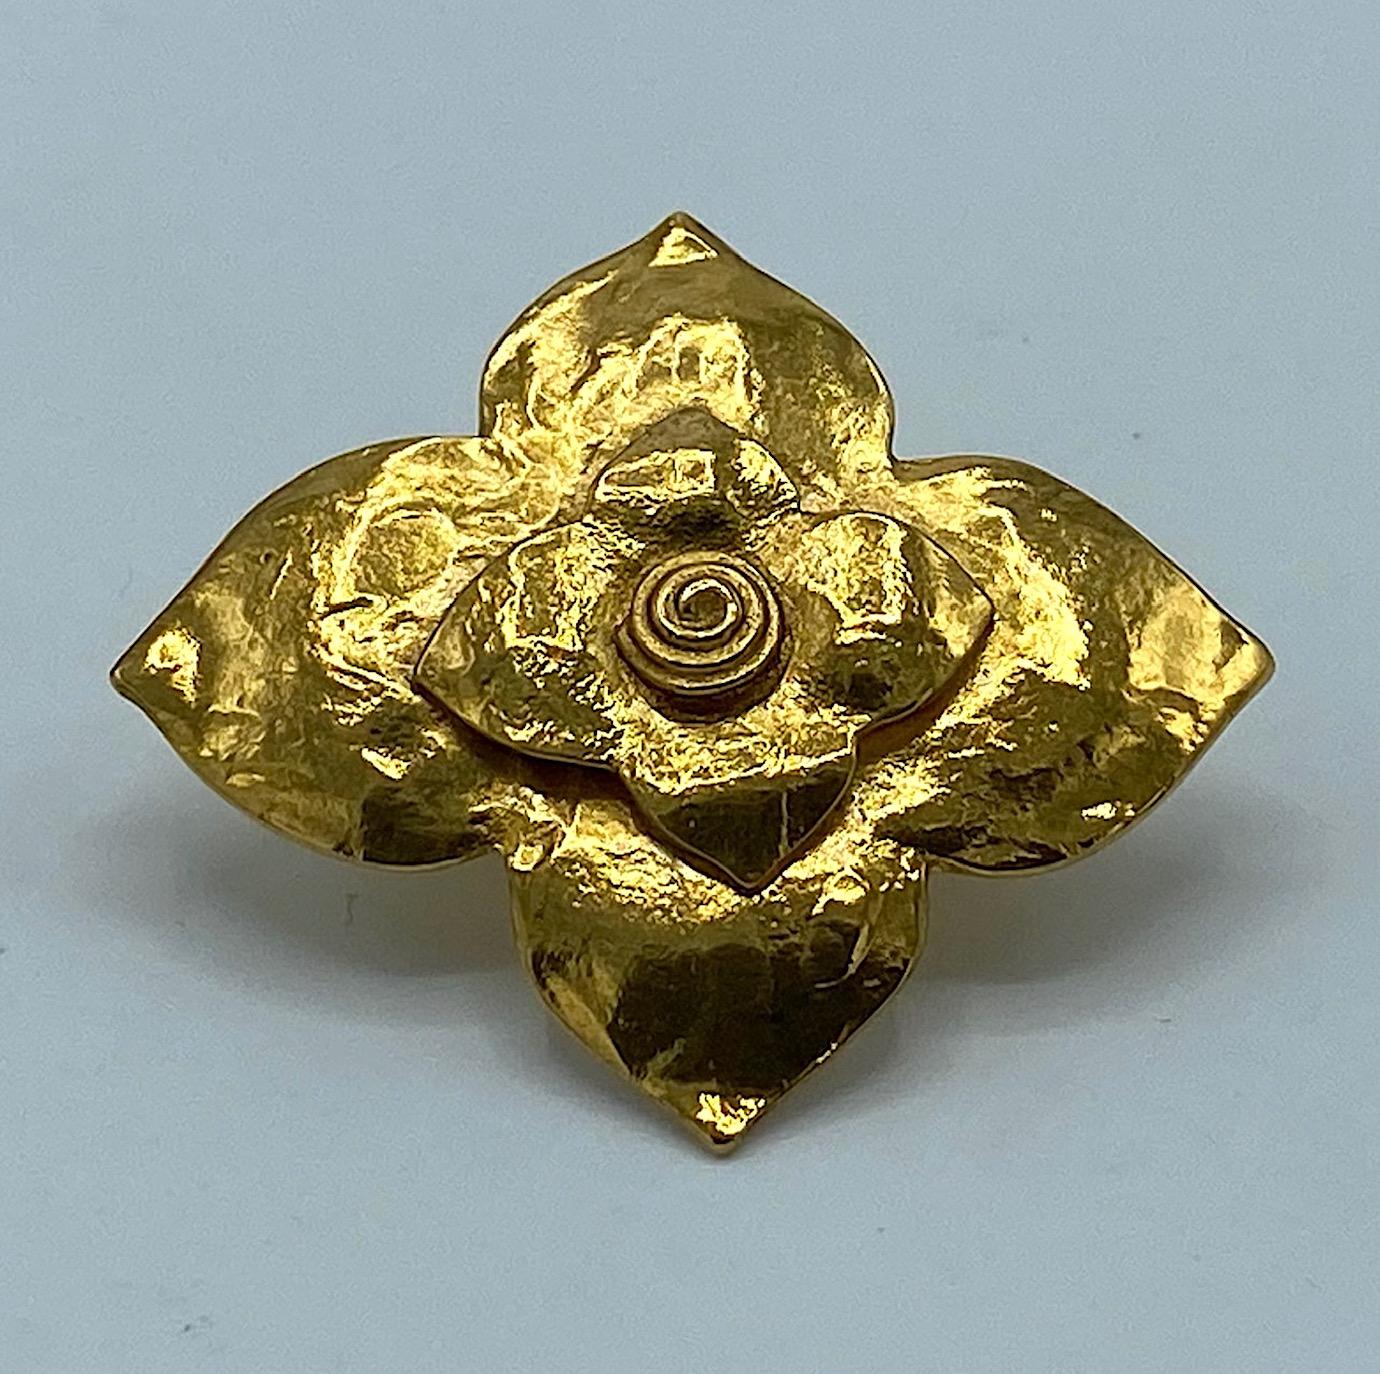 Yves Saint Laurent scarf ring in the form of a four petal flower. Martele' gold plate finish. Smaller four petal flower mounted onto the larger one. The face measures 2 inches wide, 1.75 inches high and .63 of an inch deep. The back is textured